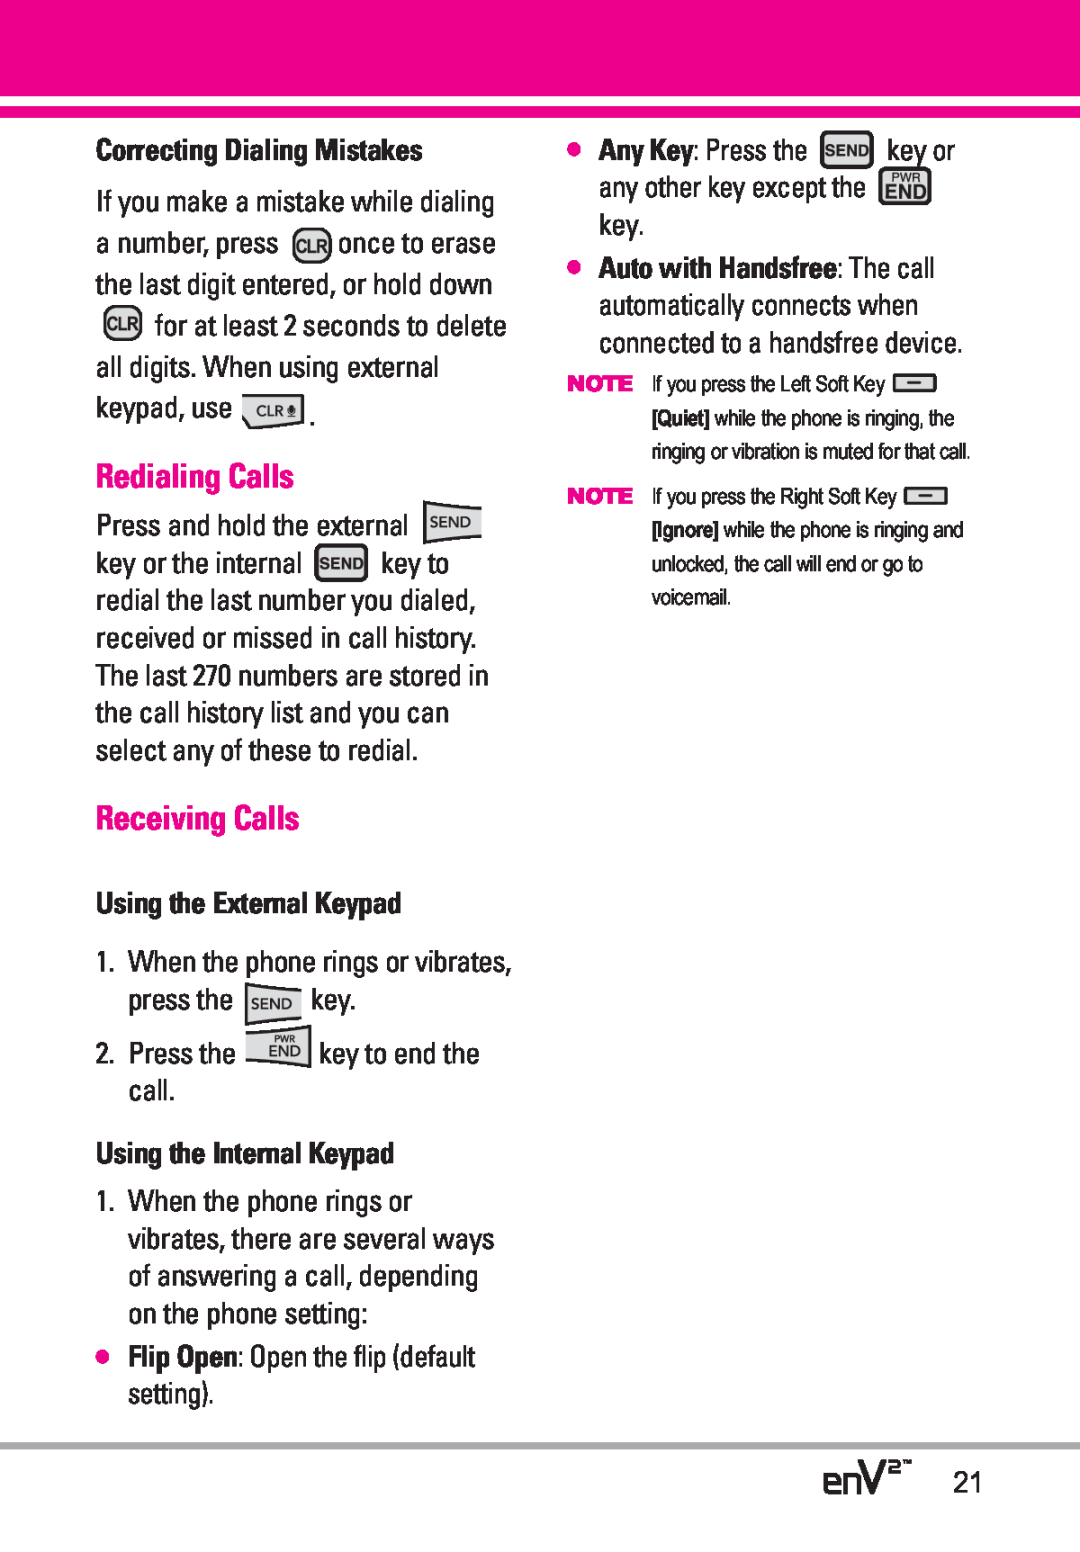 LG Electronics EnV2 Redialing Calls, Receiving Calls, Correcting Dialing Mistakes, If you make a mistake while dialing 